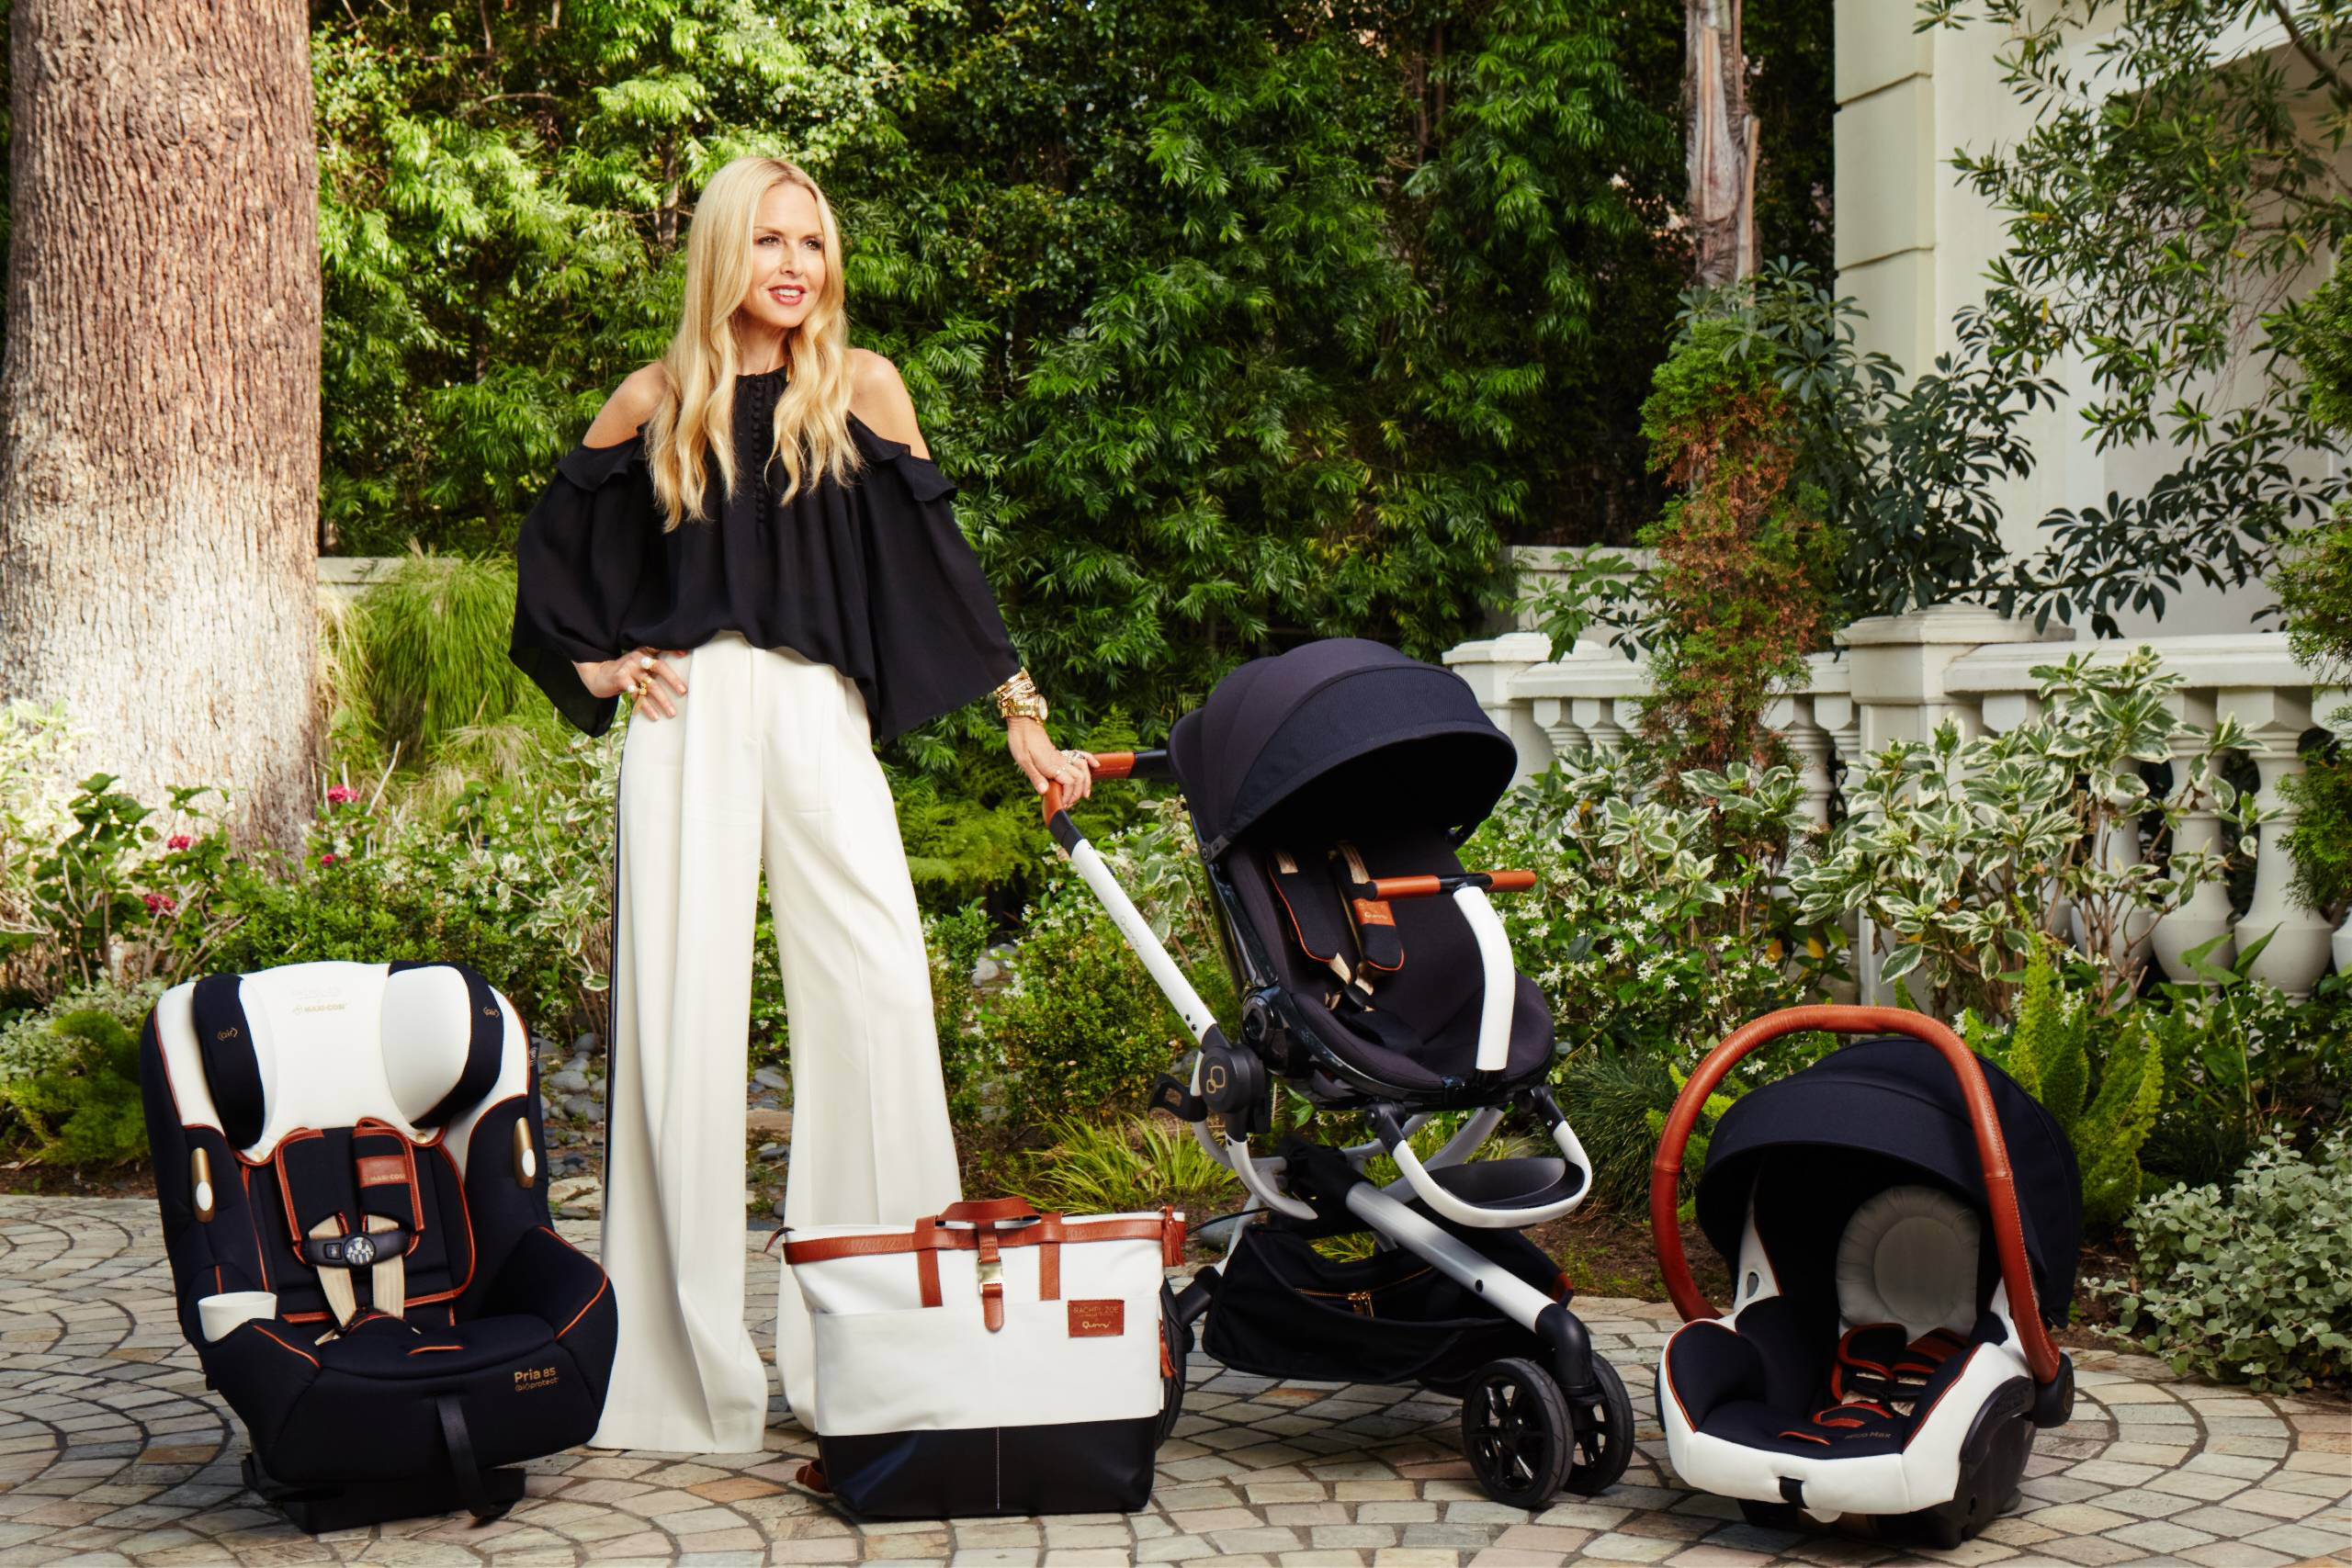 Wiskunde tv Rond en rond RACHEL ZOE x QUINNY AND MAXI-COSI COLLECTION LAUNCHES